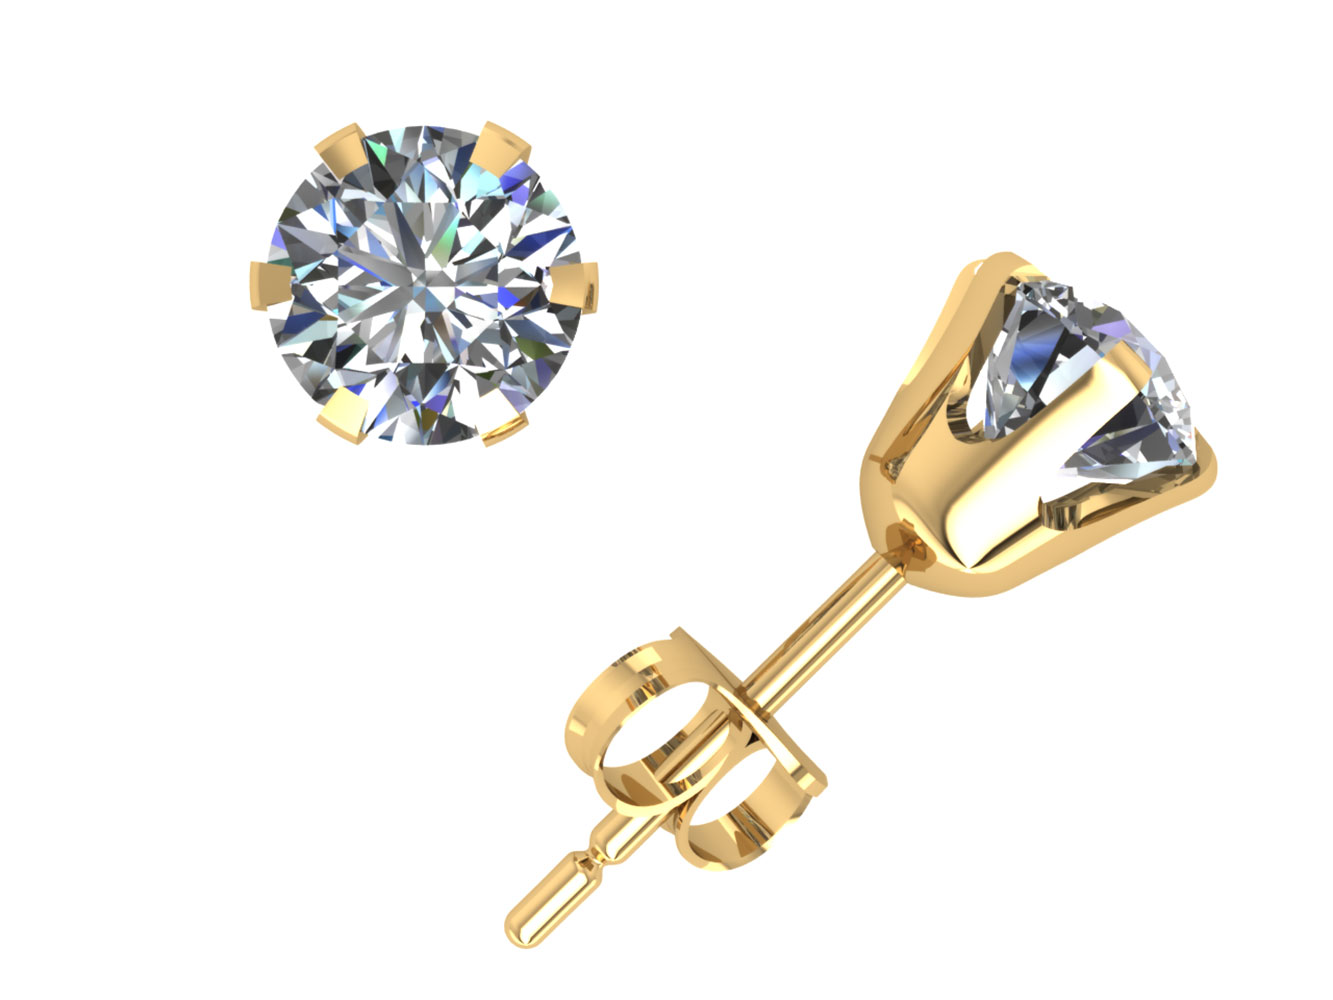 Jewel We Sell Real 1Ct Round Diamond Stud Earrings 10k White or Yellow Gold Prong Setting Push Back K I2